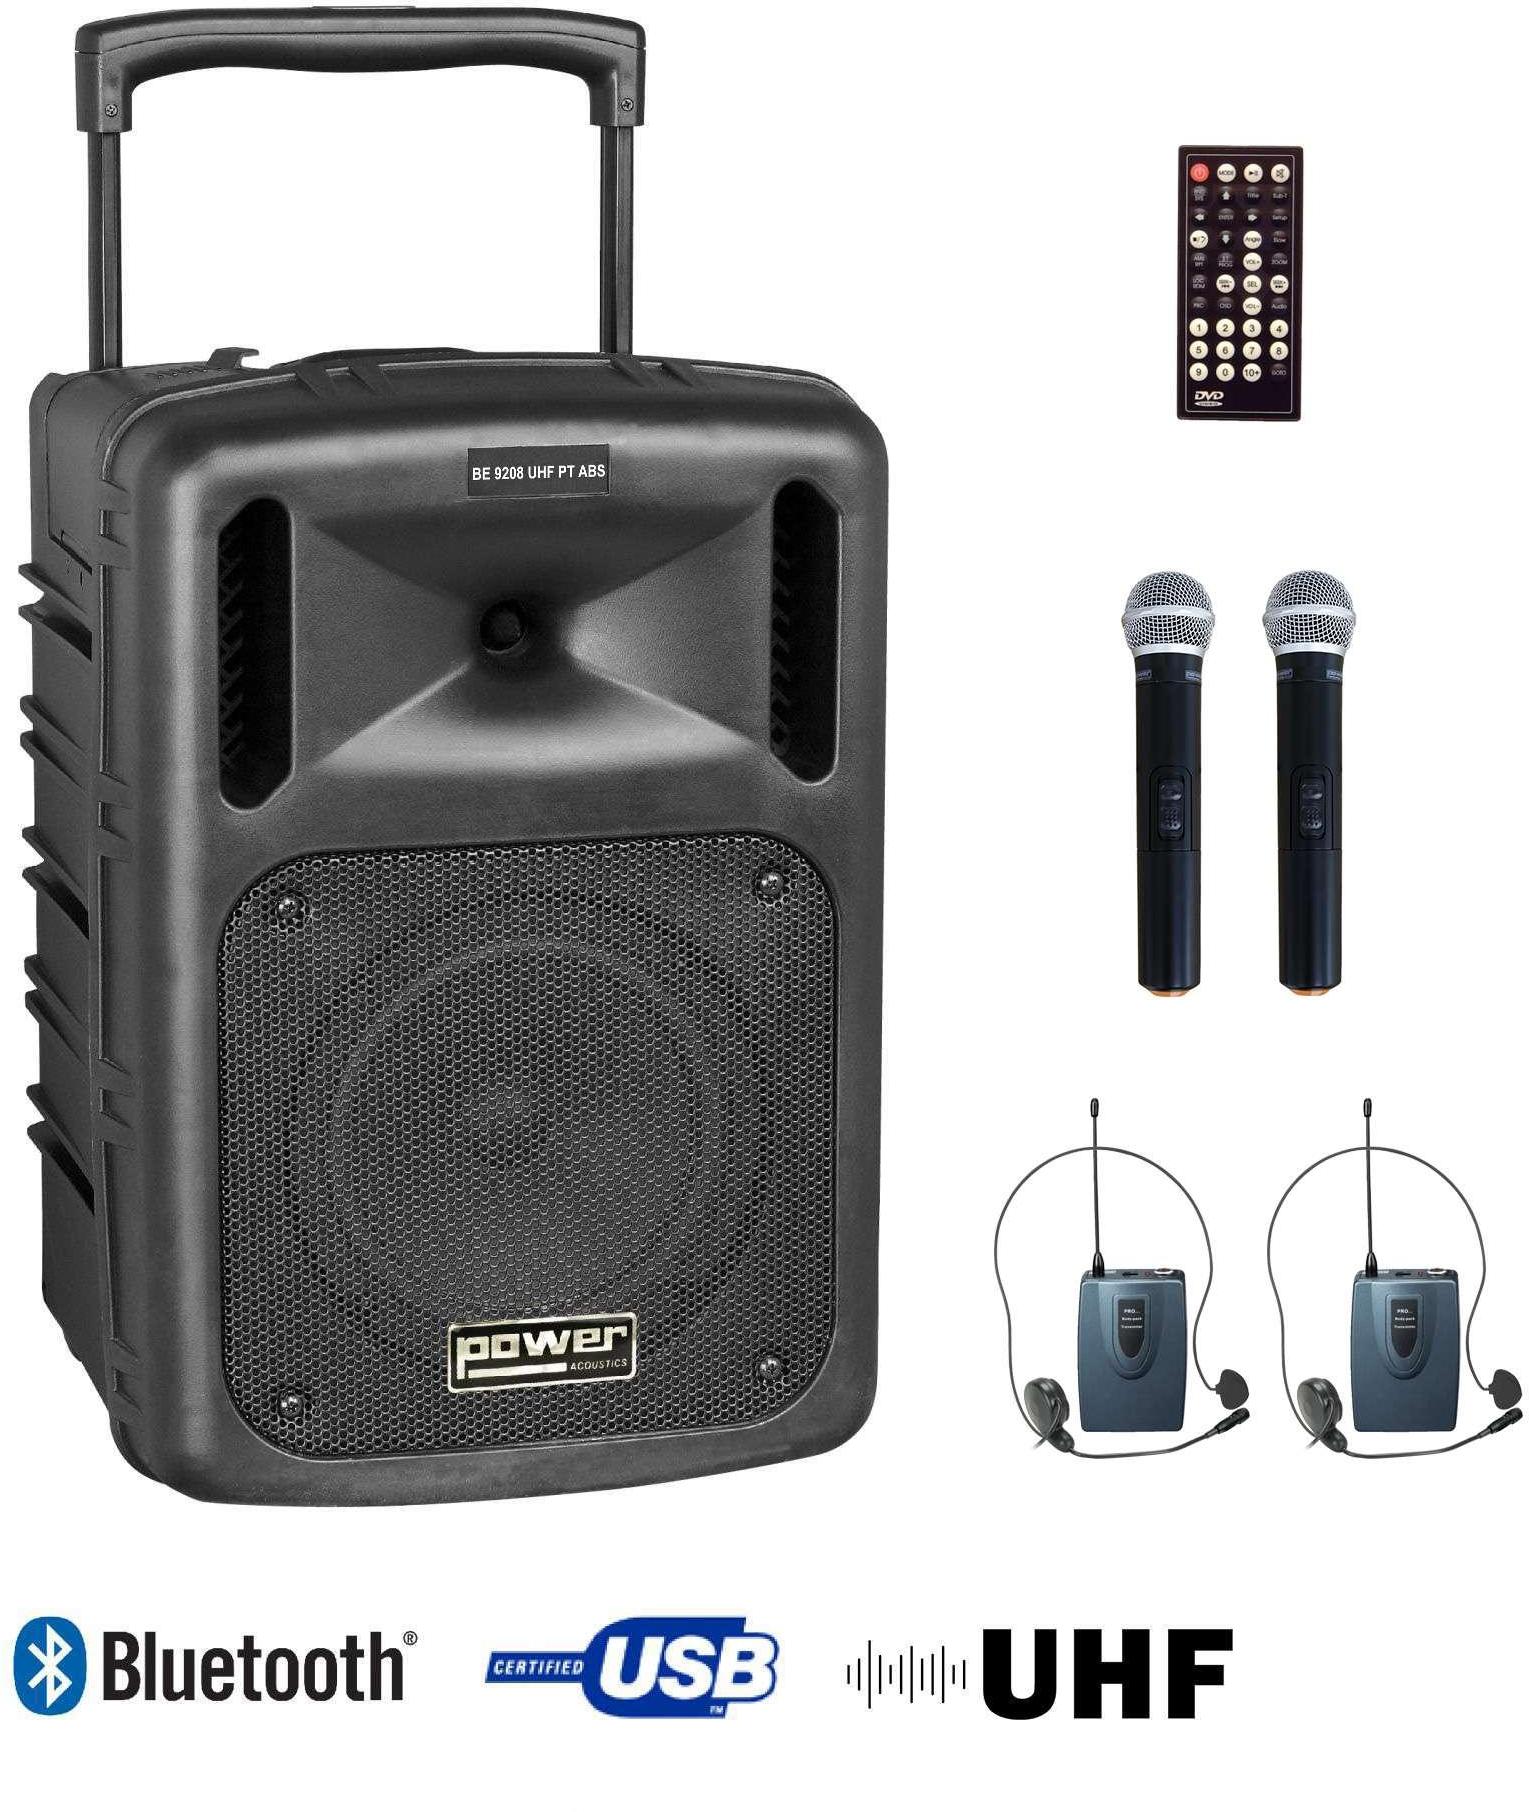 Portable pa system Power acoustics Be 9208 Uhf Pt Abs